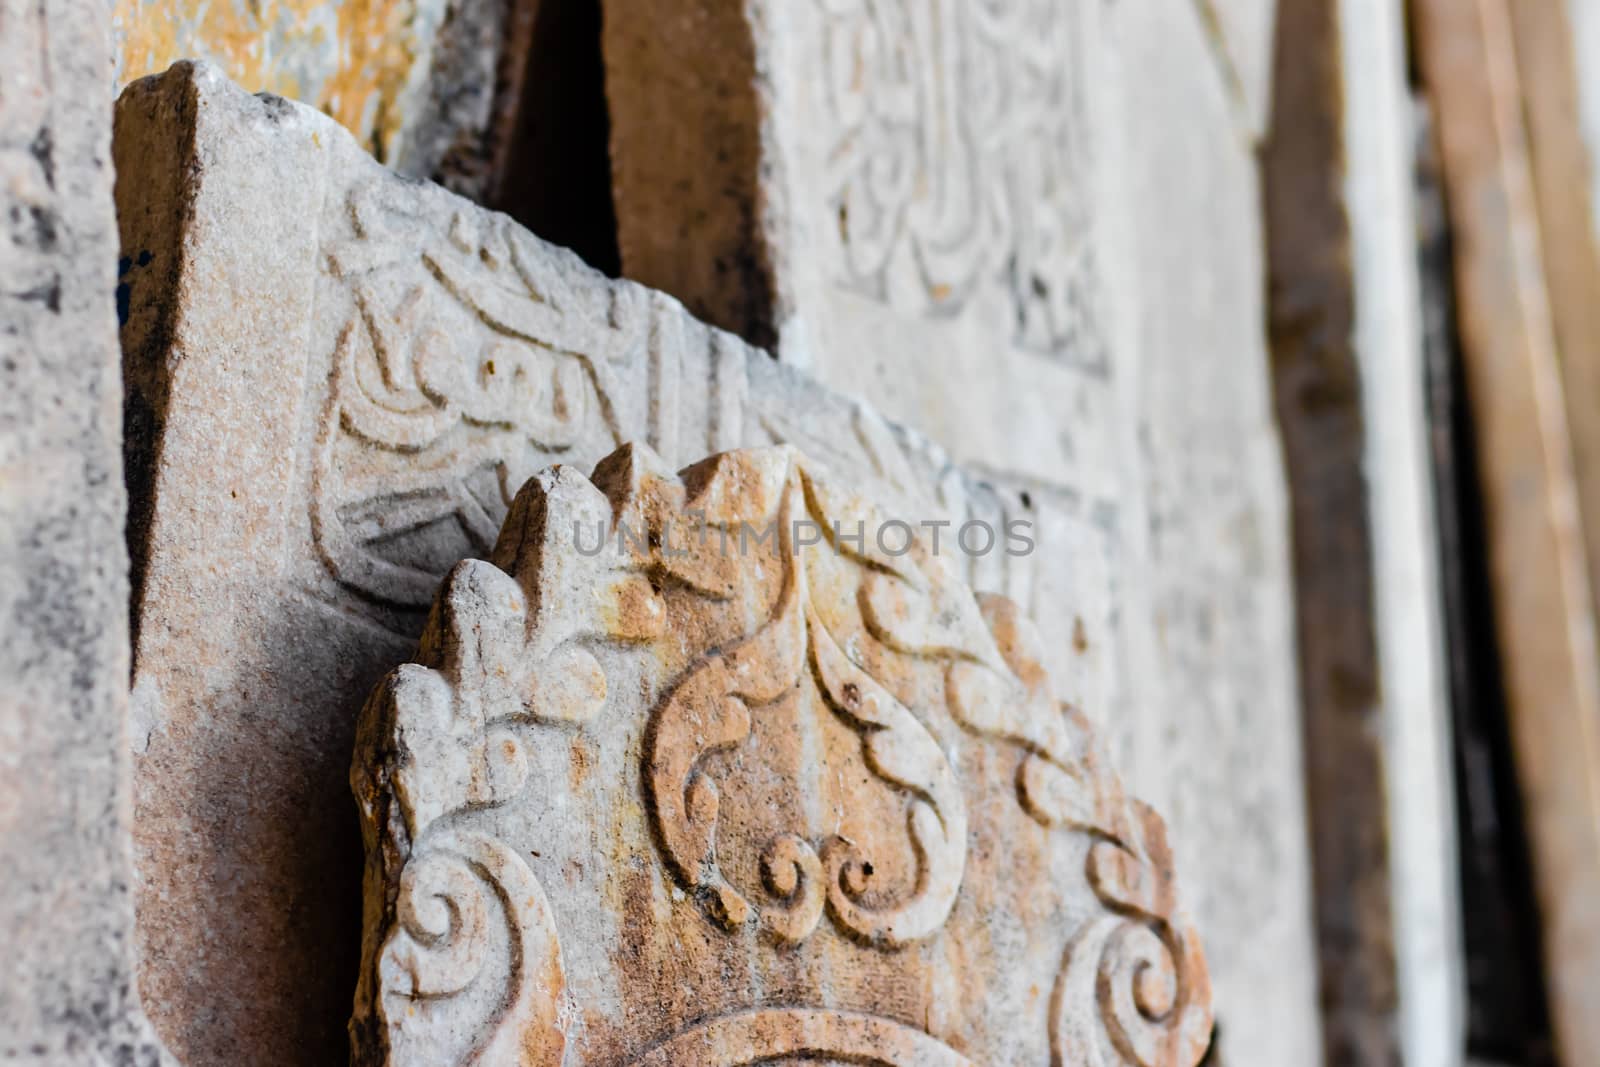 some antique tablets with interesting textures on them at a church at ephesus. photo has taken from izmir/turkey.